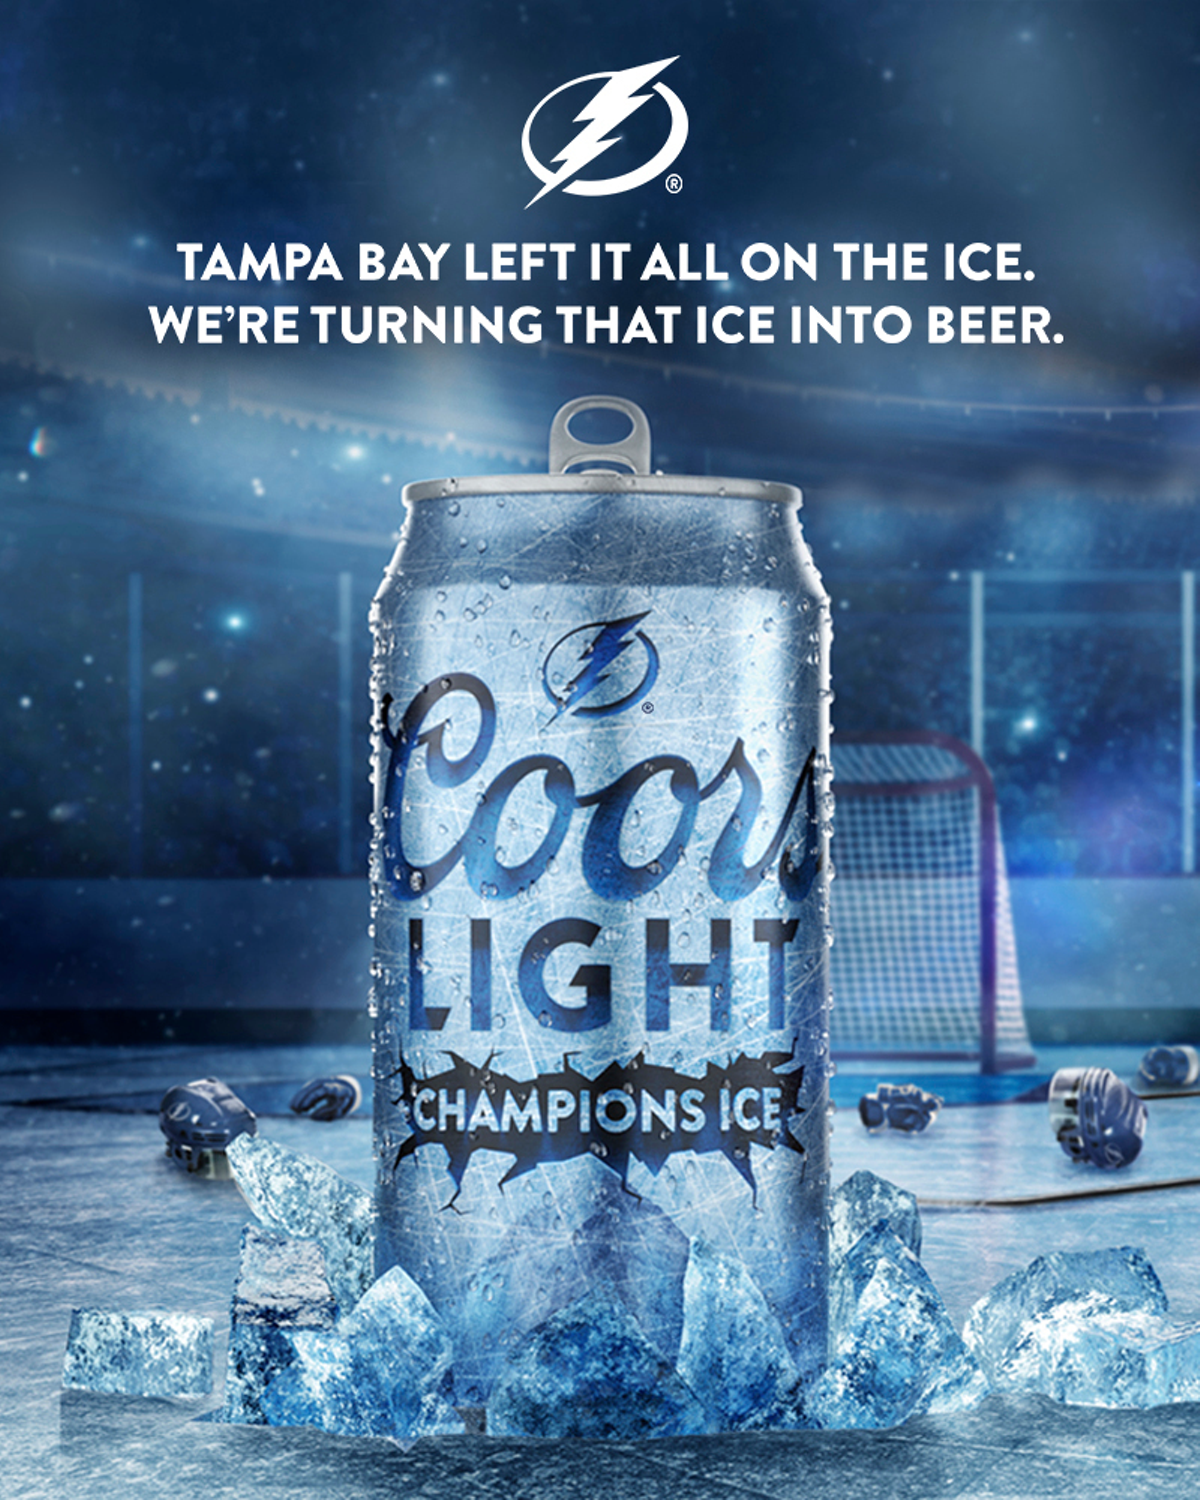 Coors Light launches beer using ice from the Stanley Cup finals 